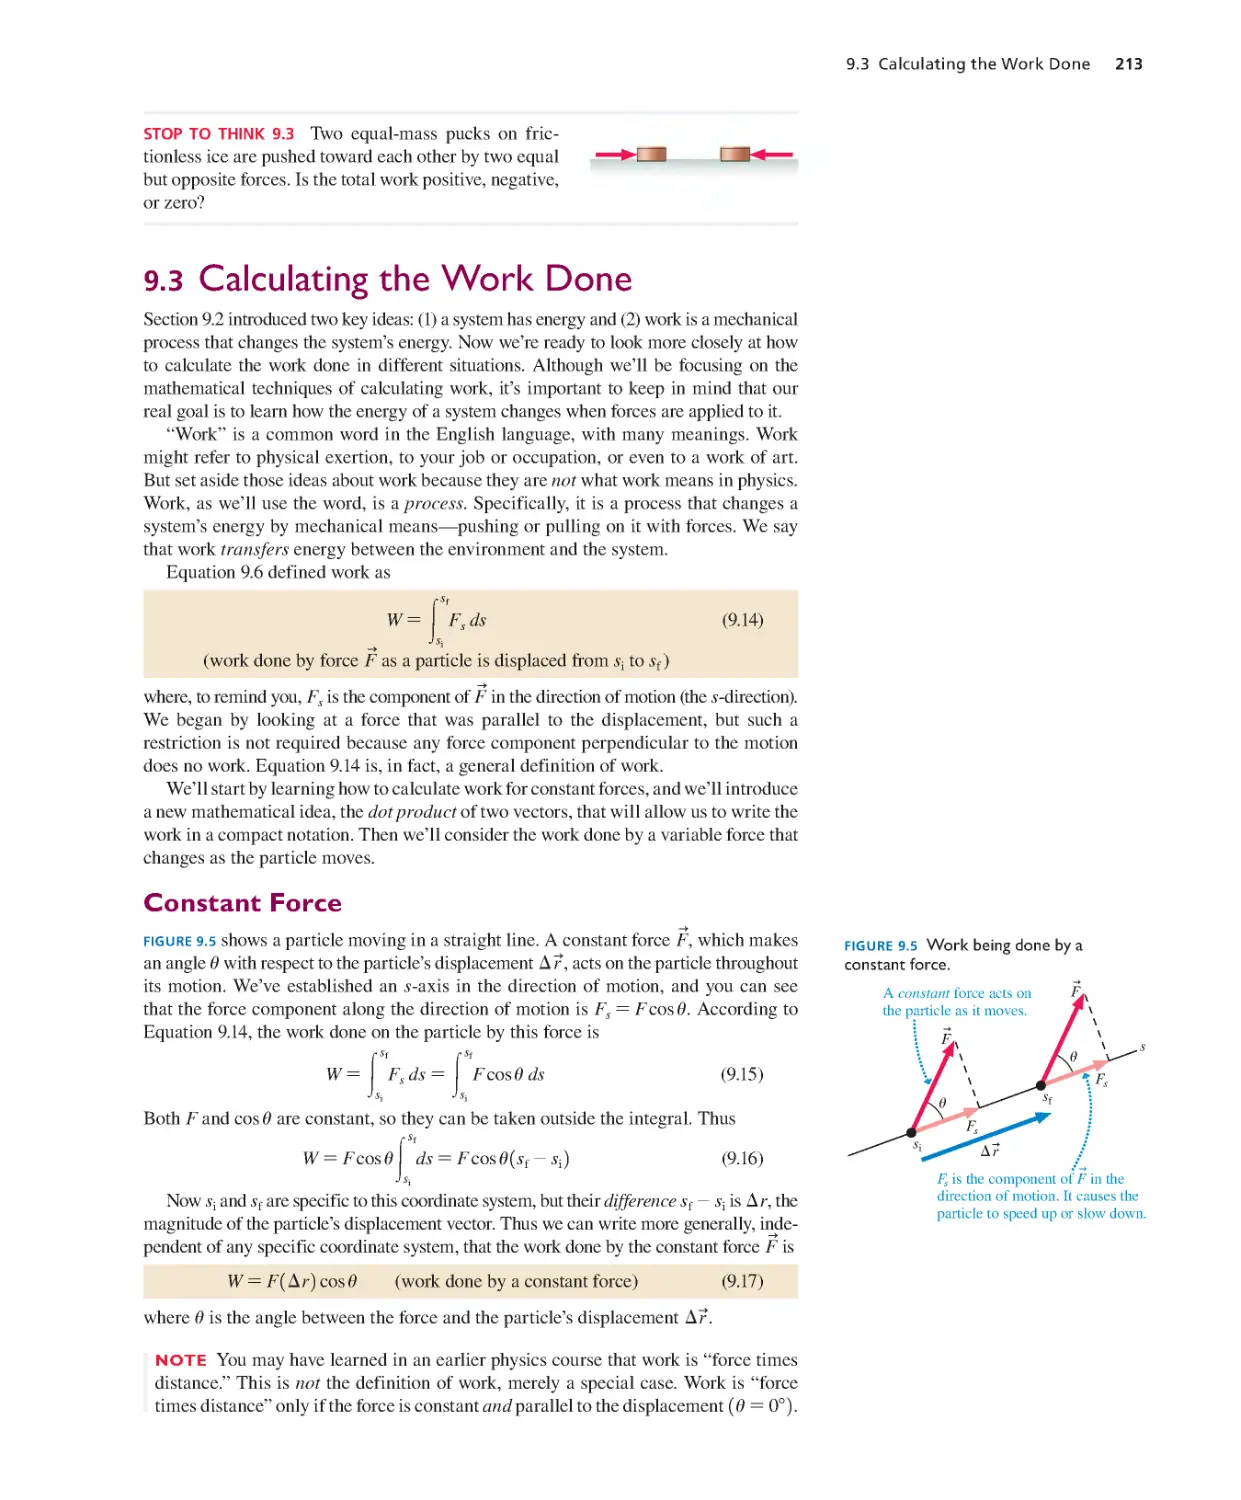 9.3. Calculating the Work Done